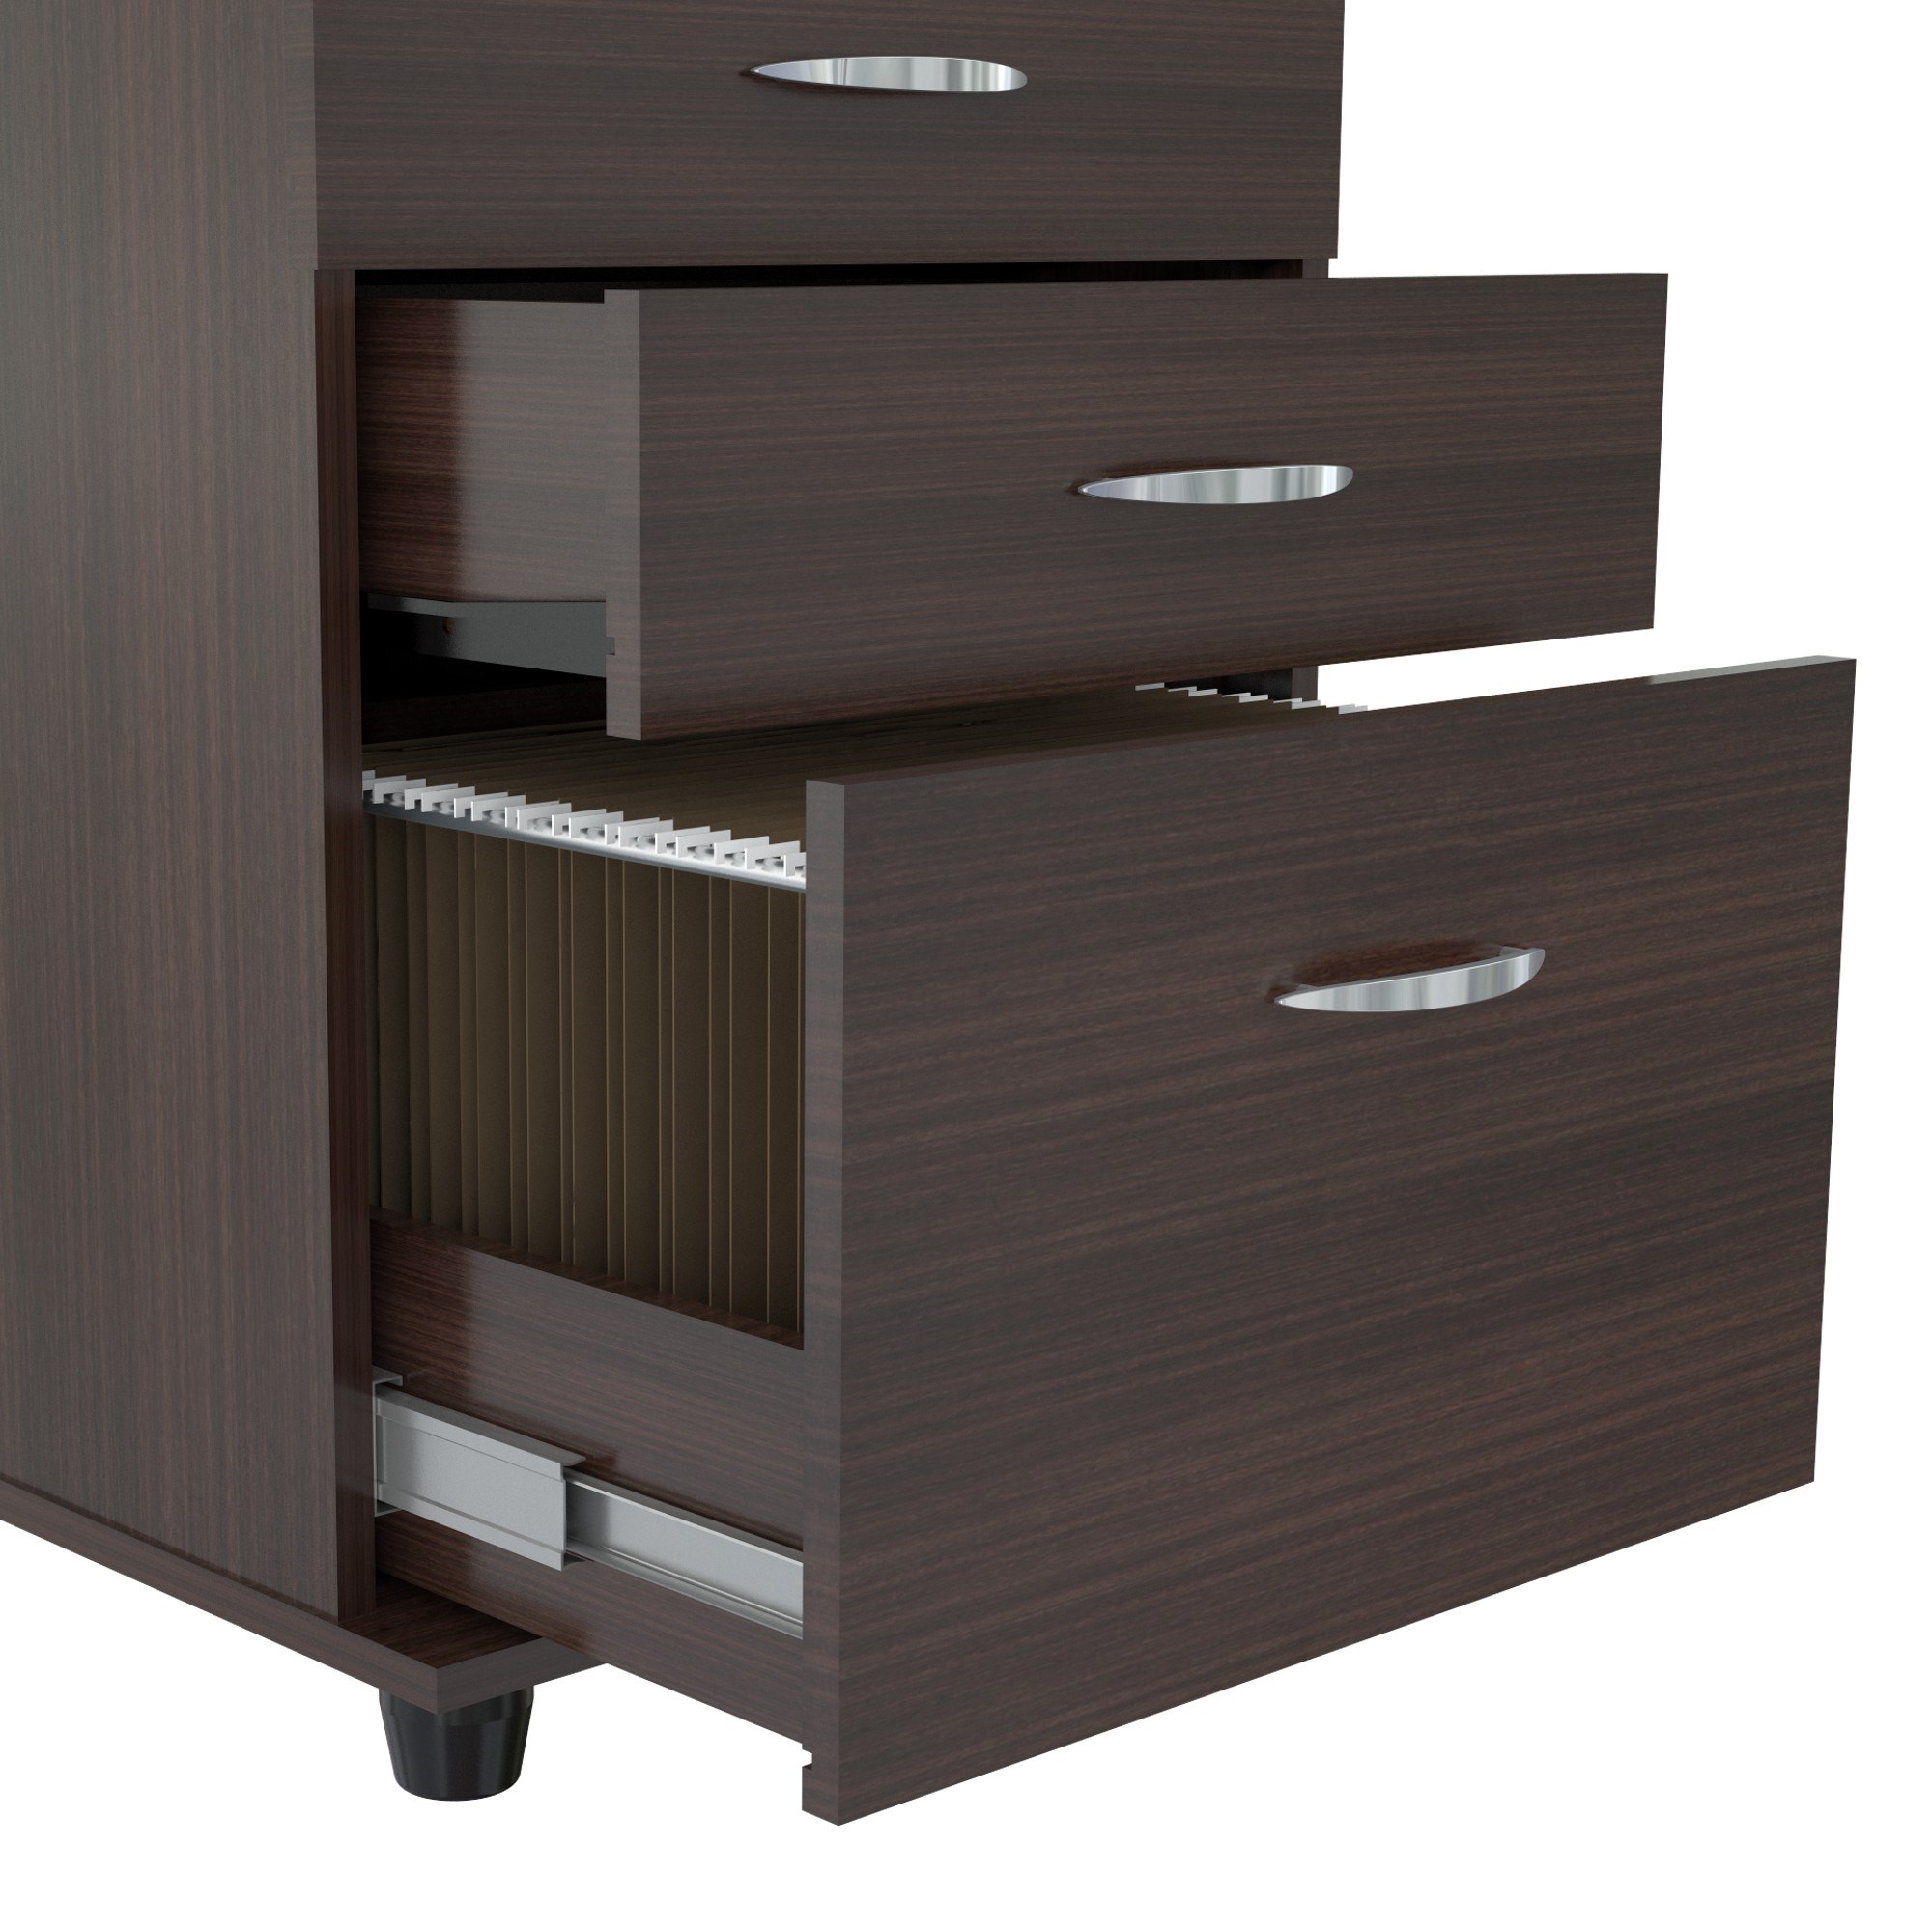 26.8" Espresso Melamine and Engineered Wood File Cabinet with 3 Drawers